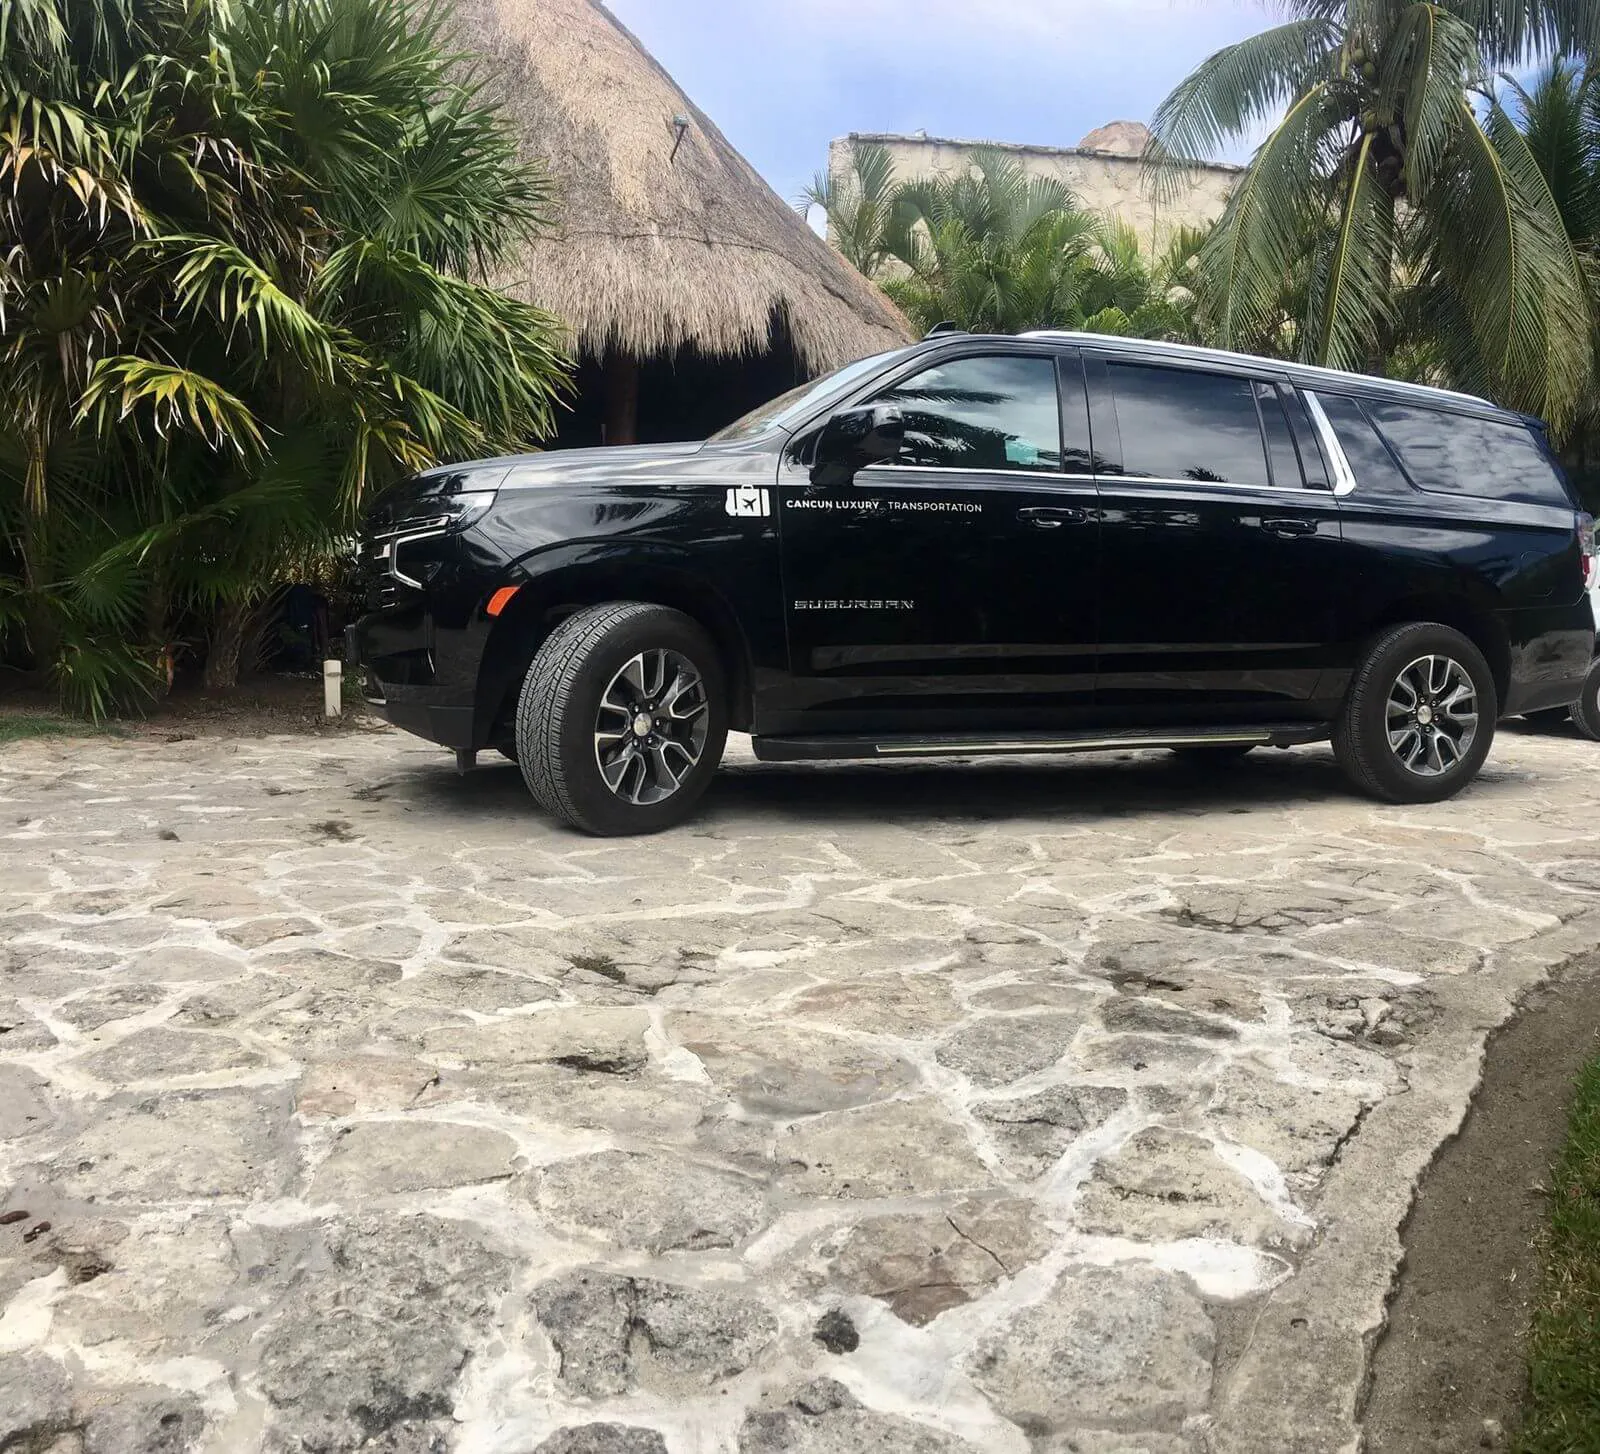 Luxury black Suburban 2021 parked in front of a palapa